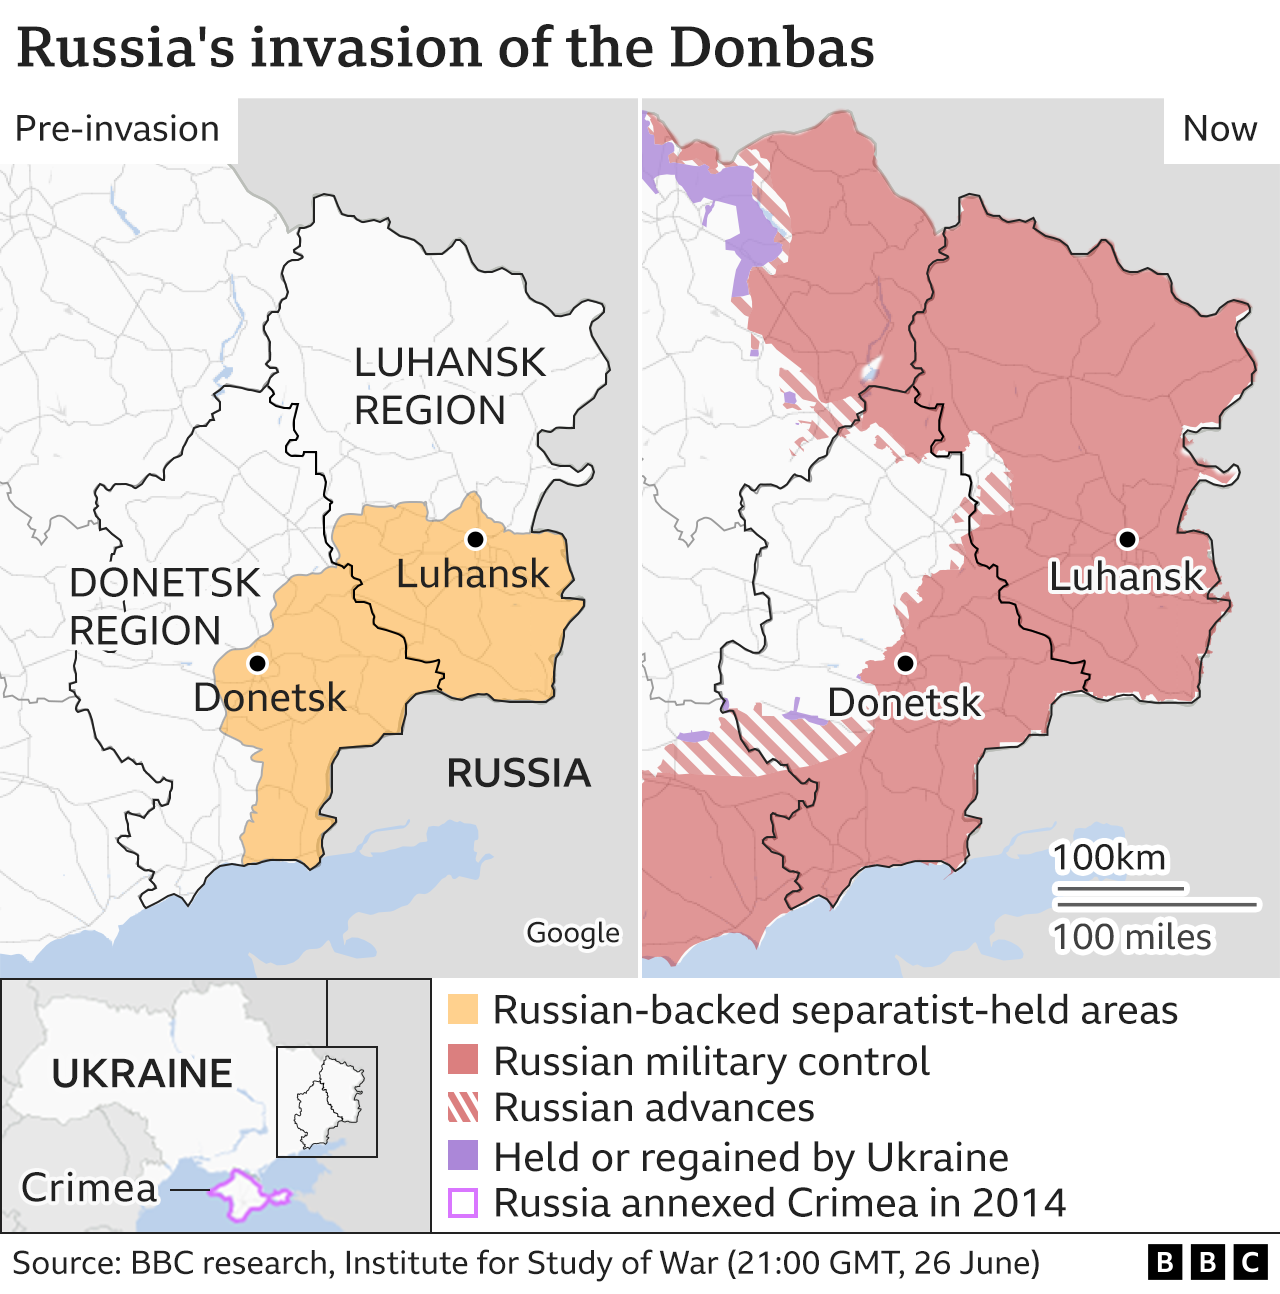 Map showing Donbas region before and after invasion, updated 27 June